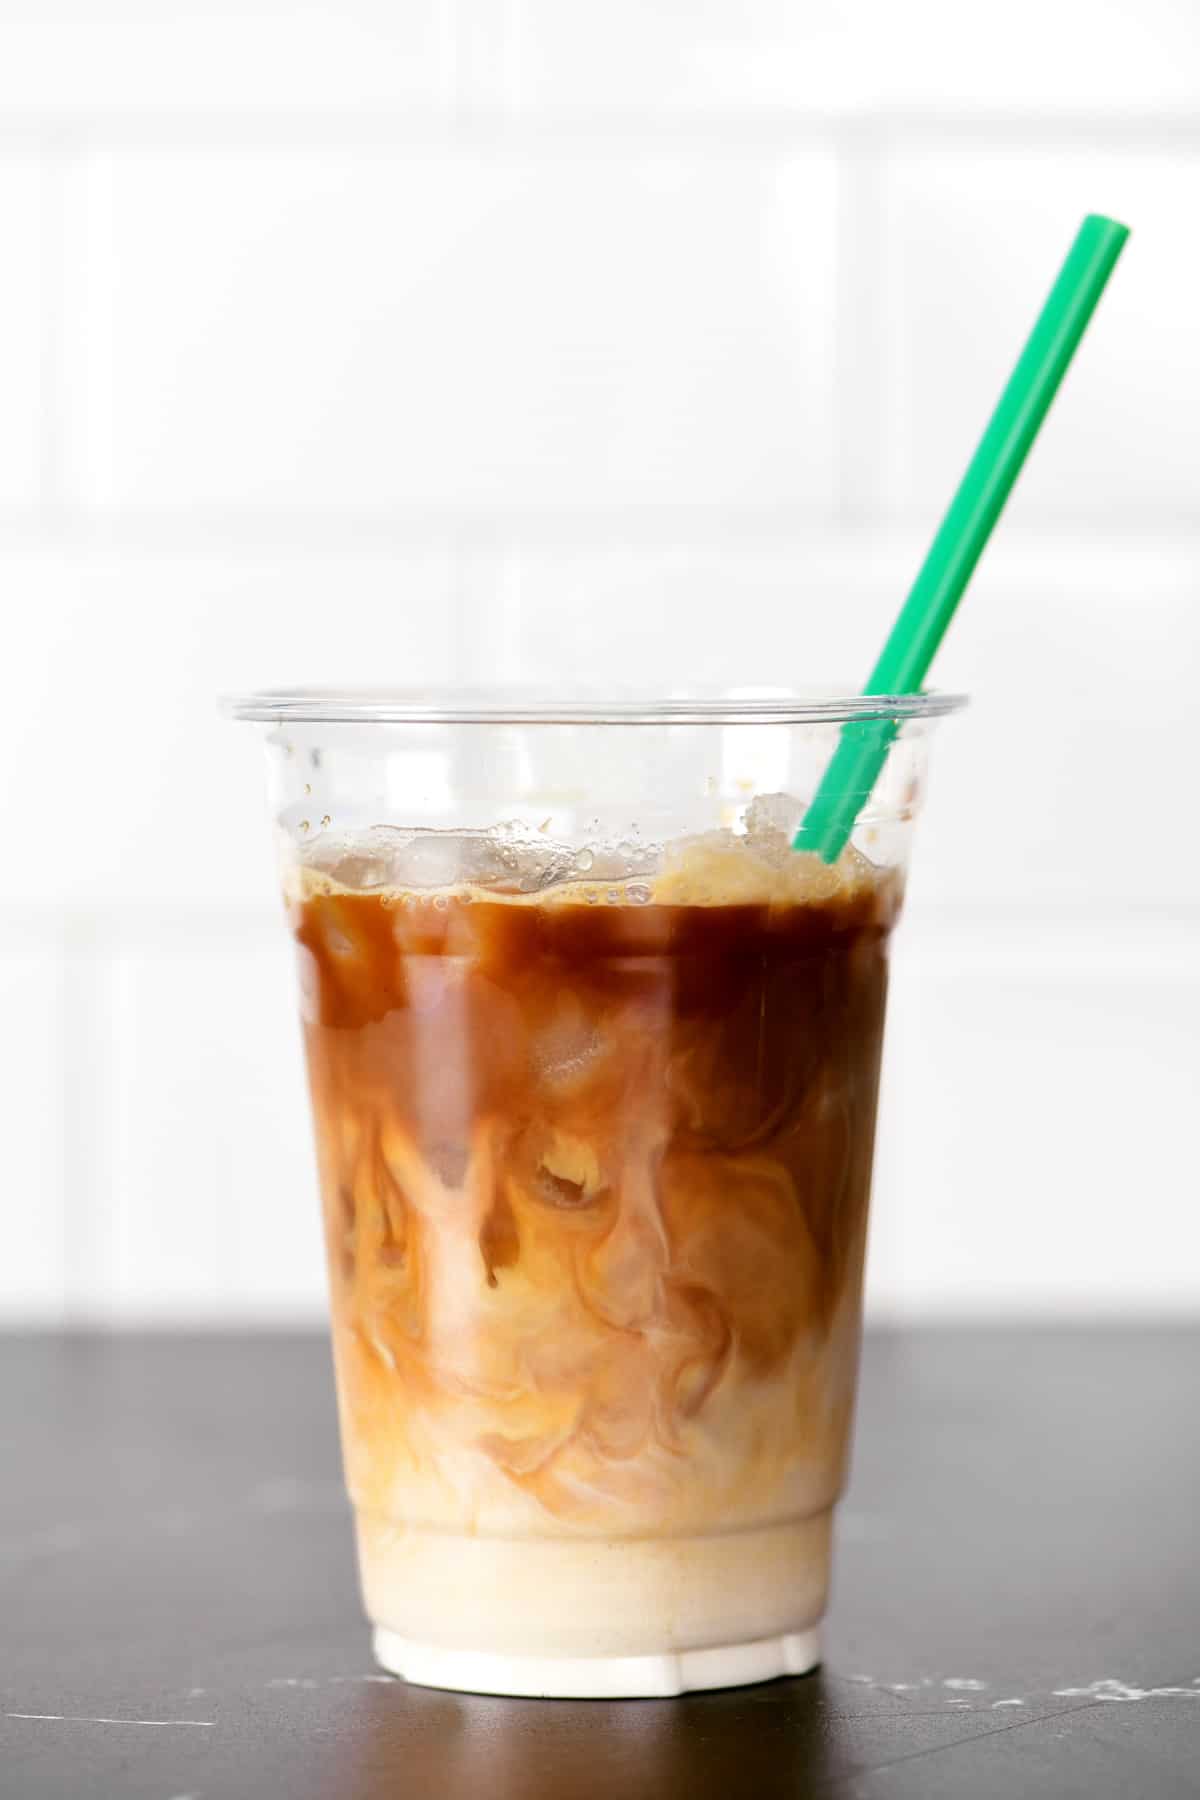 Iced coffee in a cup with a green straw.